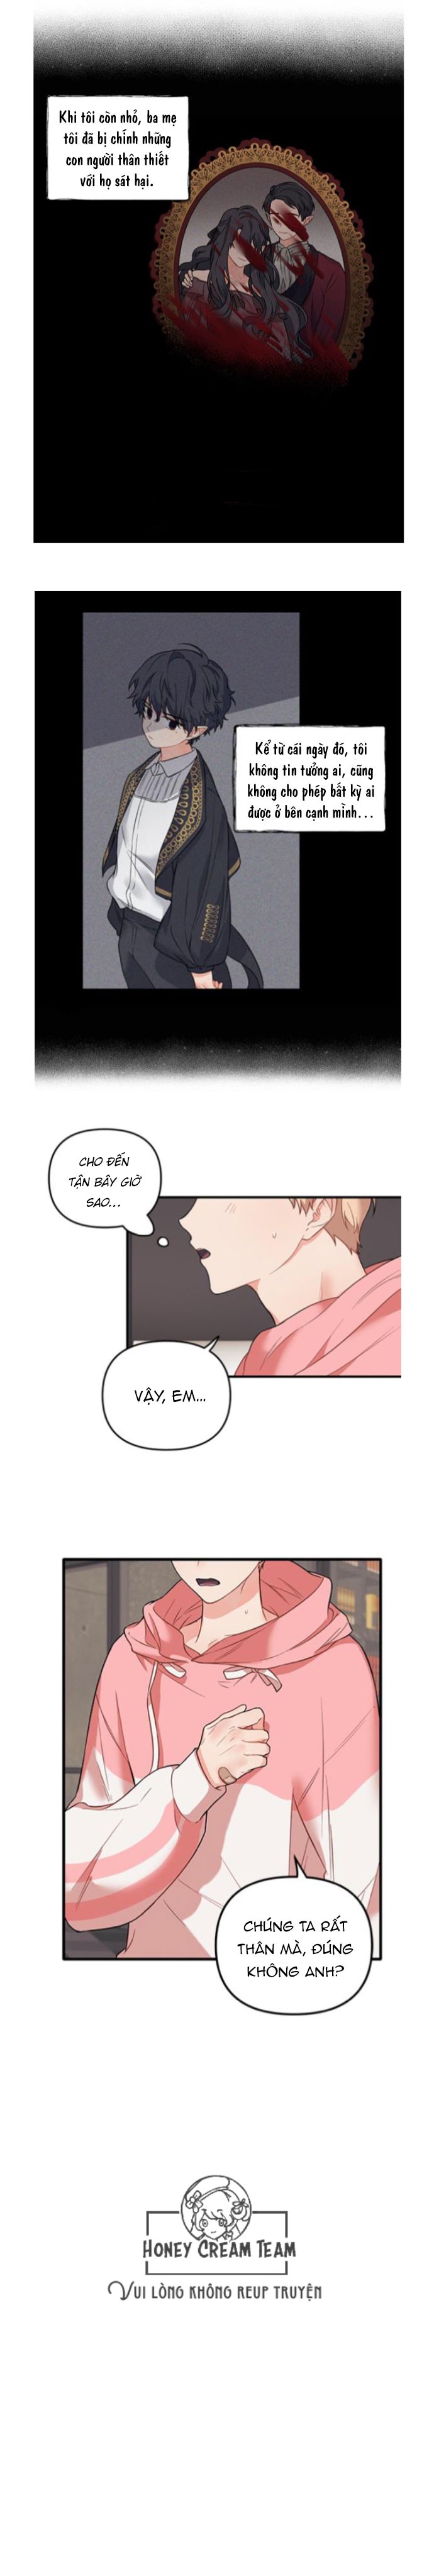 blood-and-love-chap-23-6